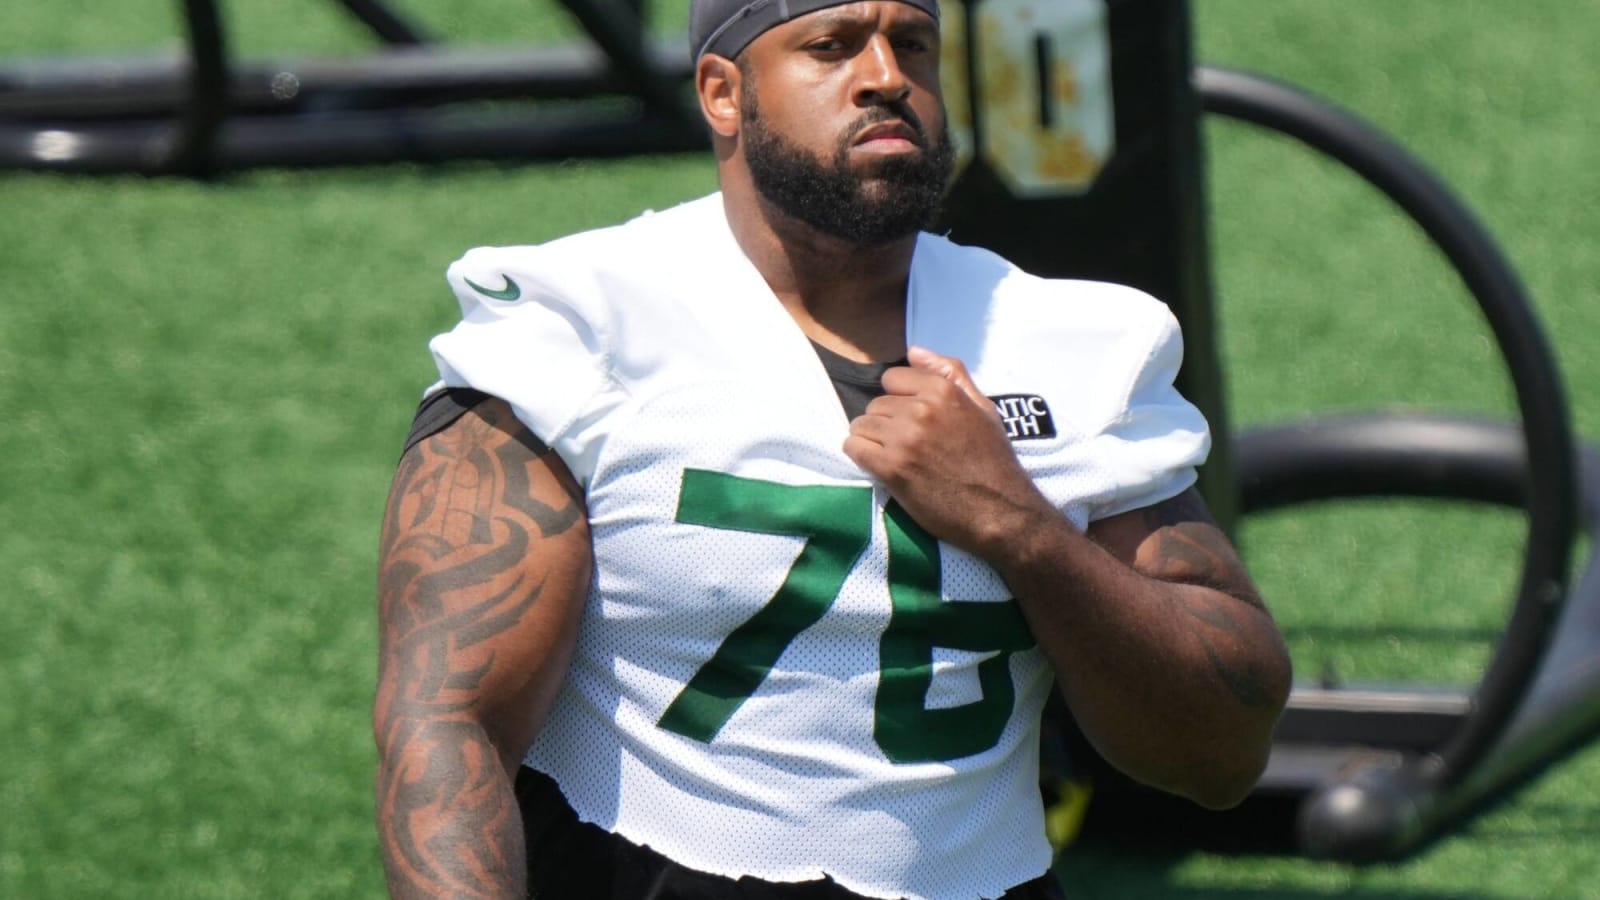 The New York Jets Have Placed Their 5x Pro Bowl Left Tackle on Season-Ending Injured Reserve.